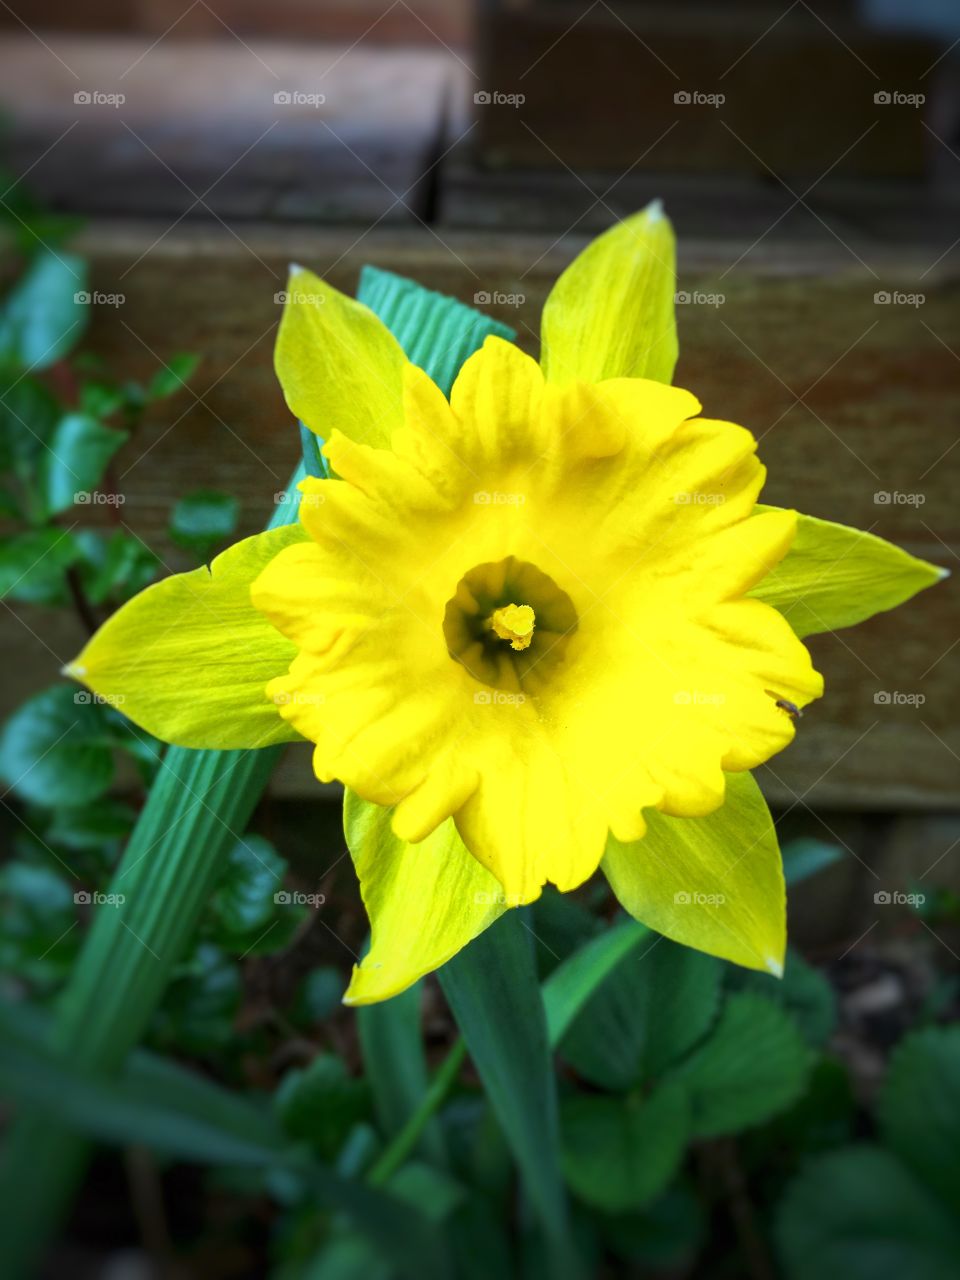 Daffodil photography, high-definition flower images, yellow flower photo 